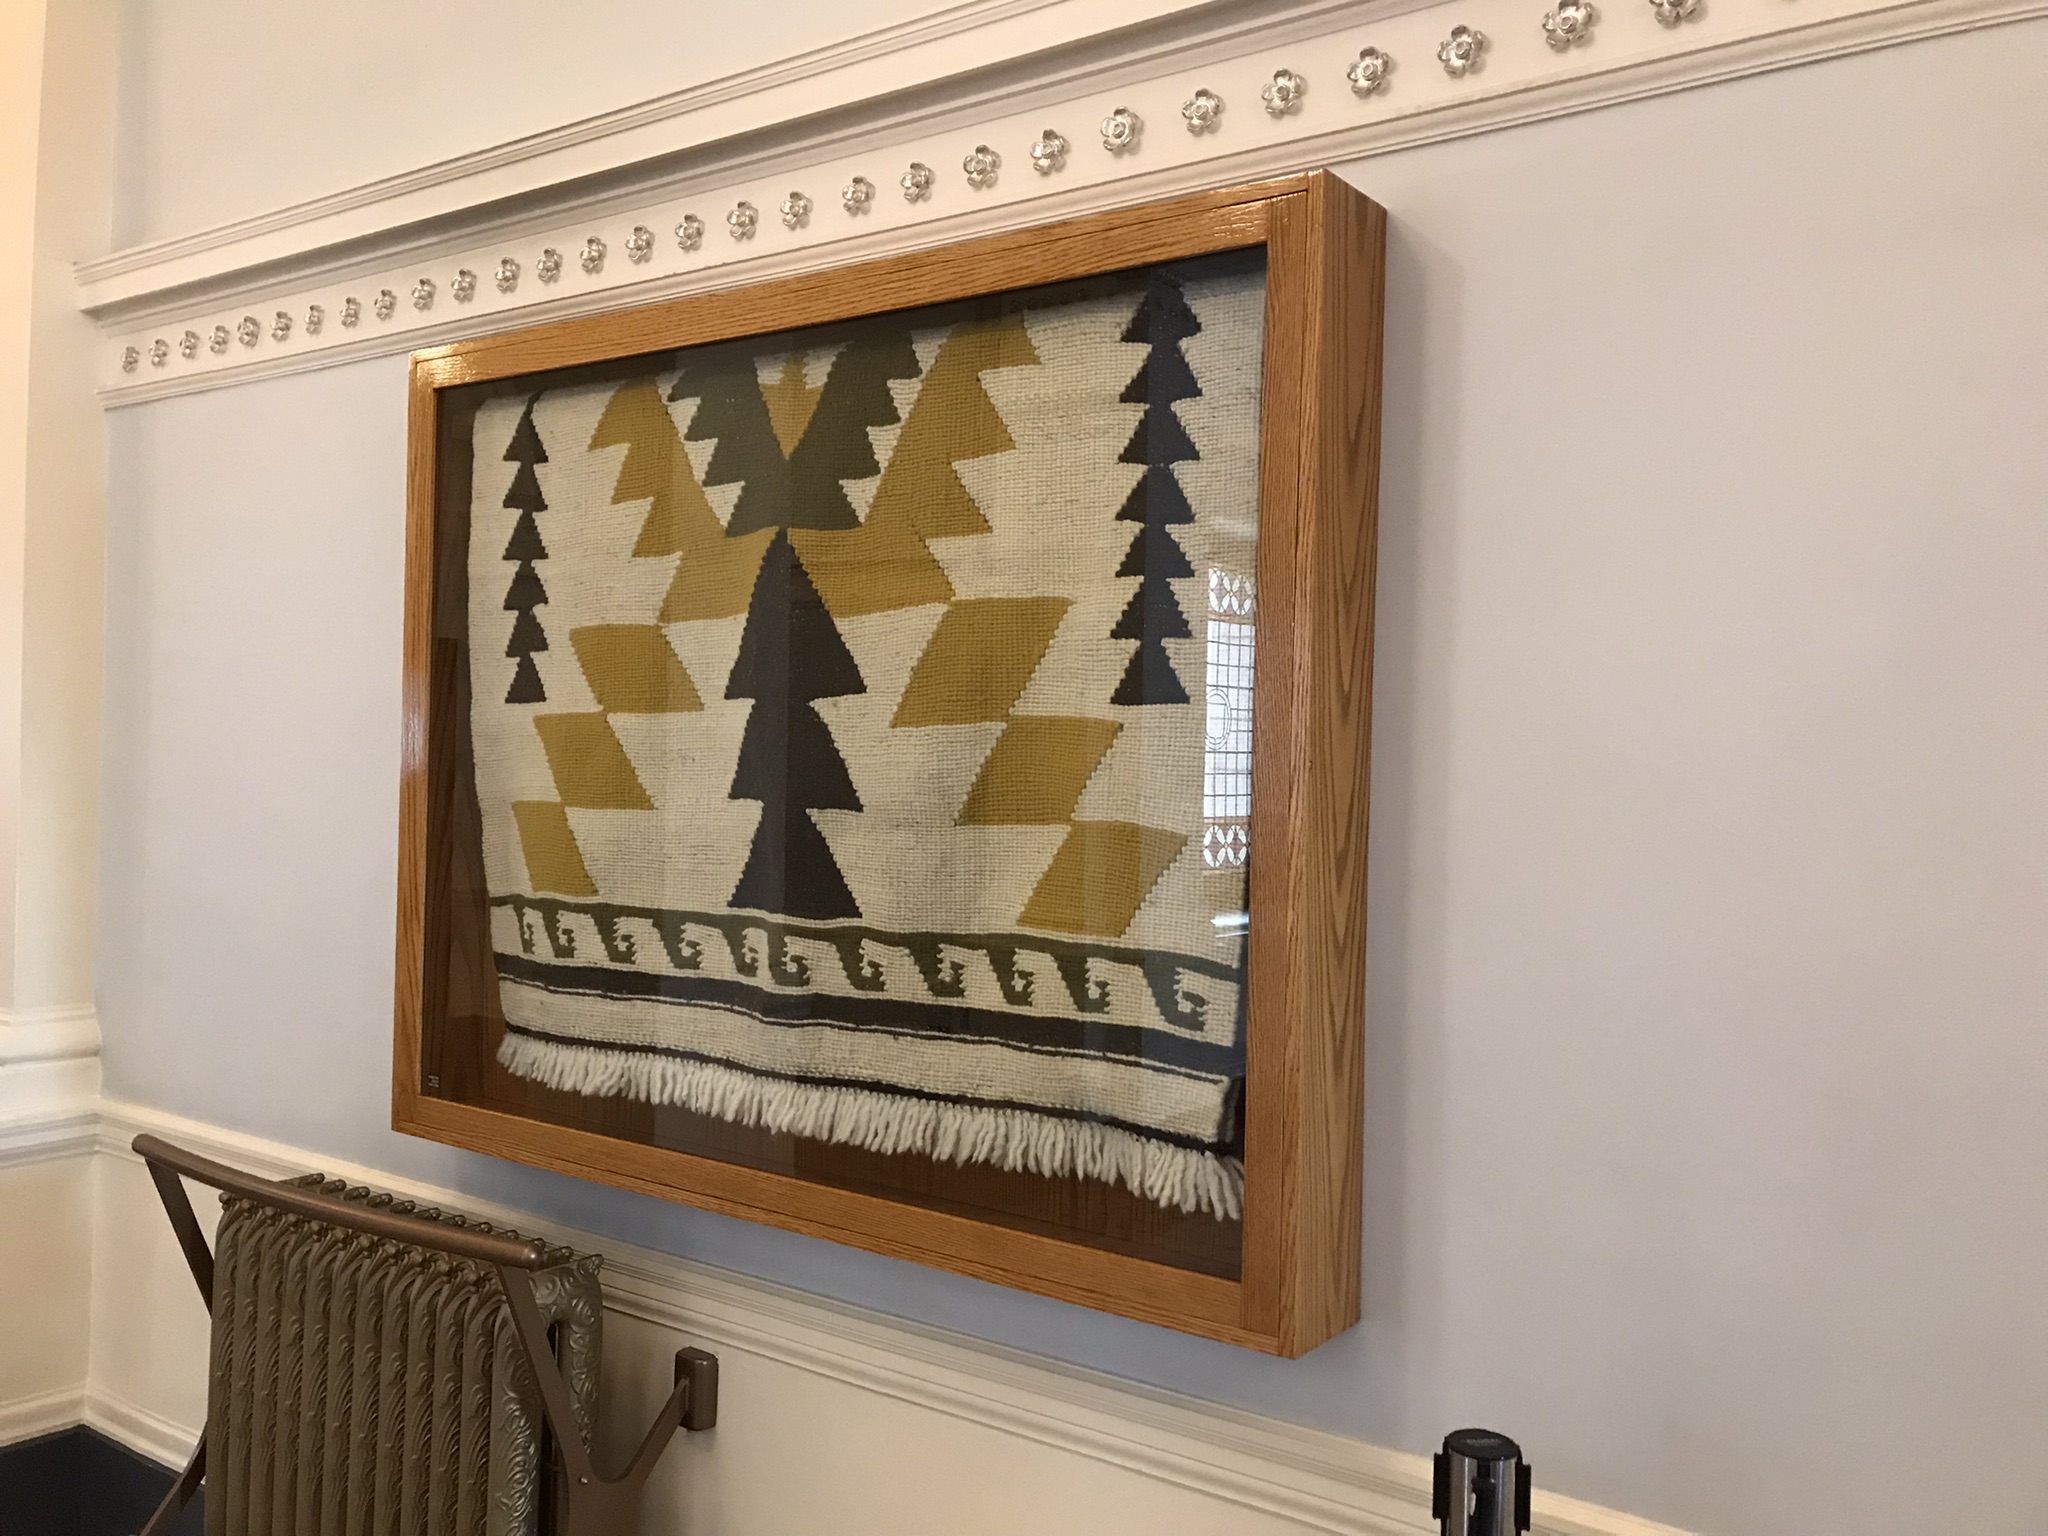 The Shwoq Well Blanket on display in the east hallway of the Parliament Buildings.